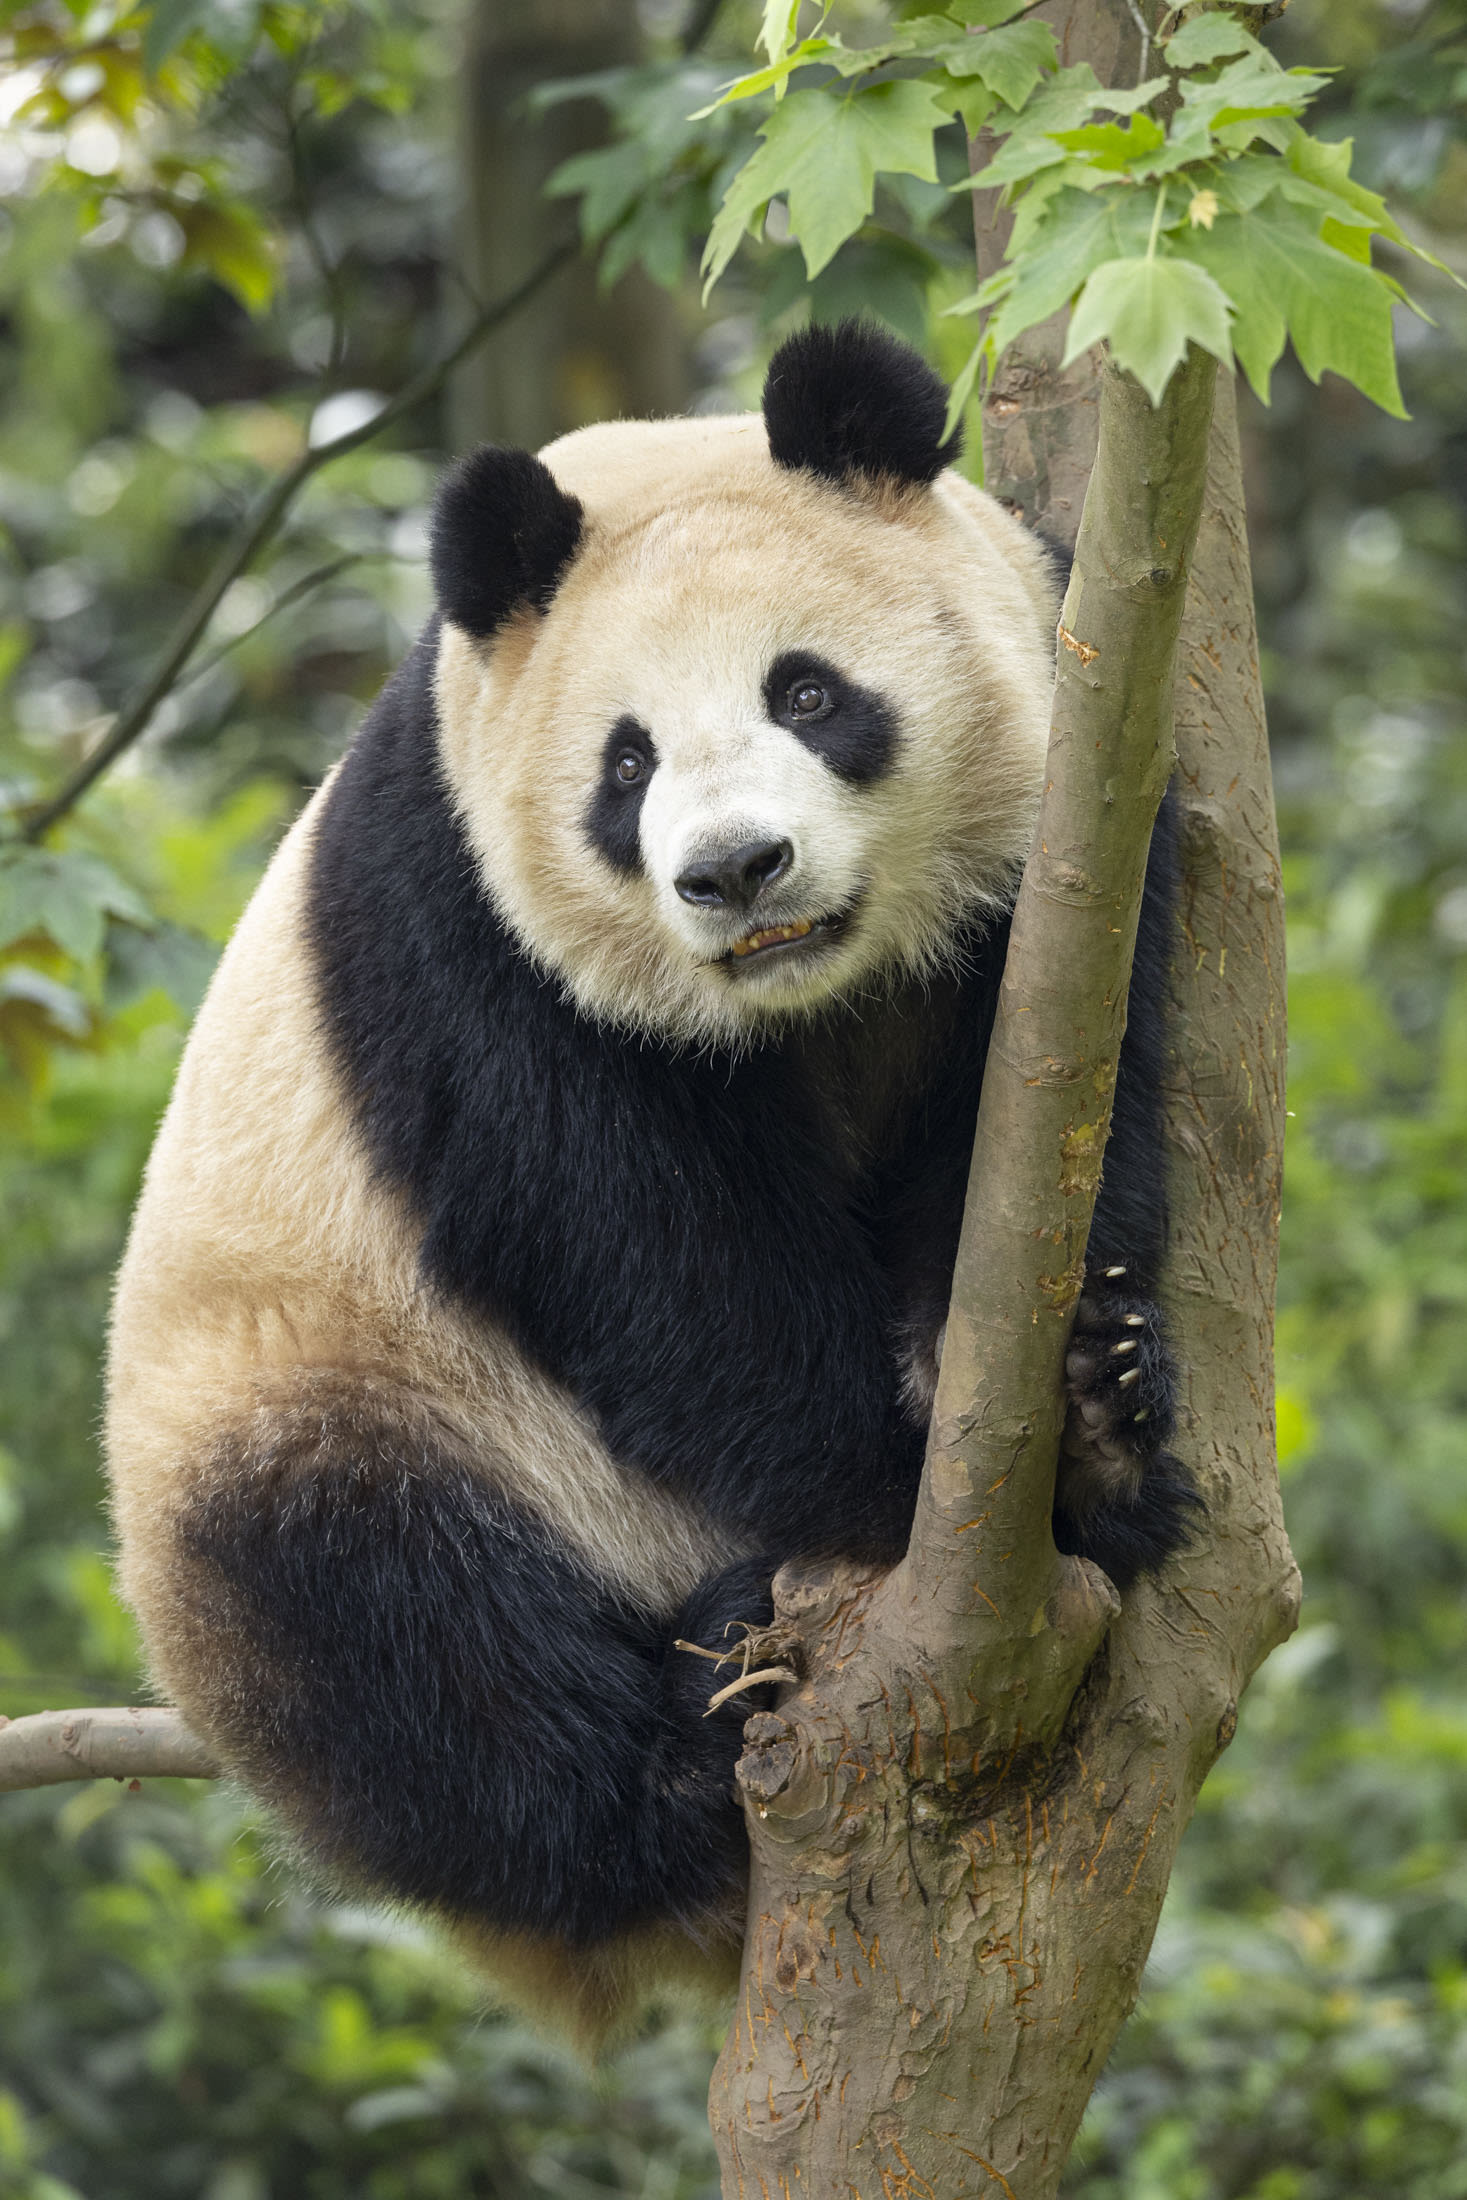 Preparing for pandas: Renovated habitat spaces ready as San Diego Zoo awaits final approval